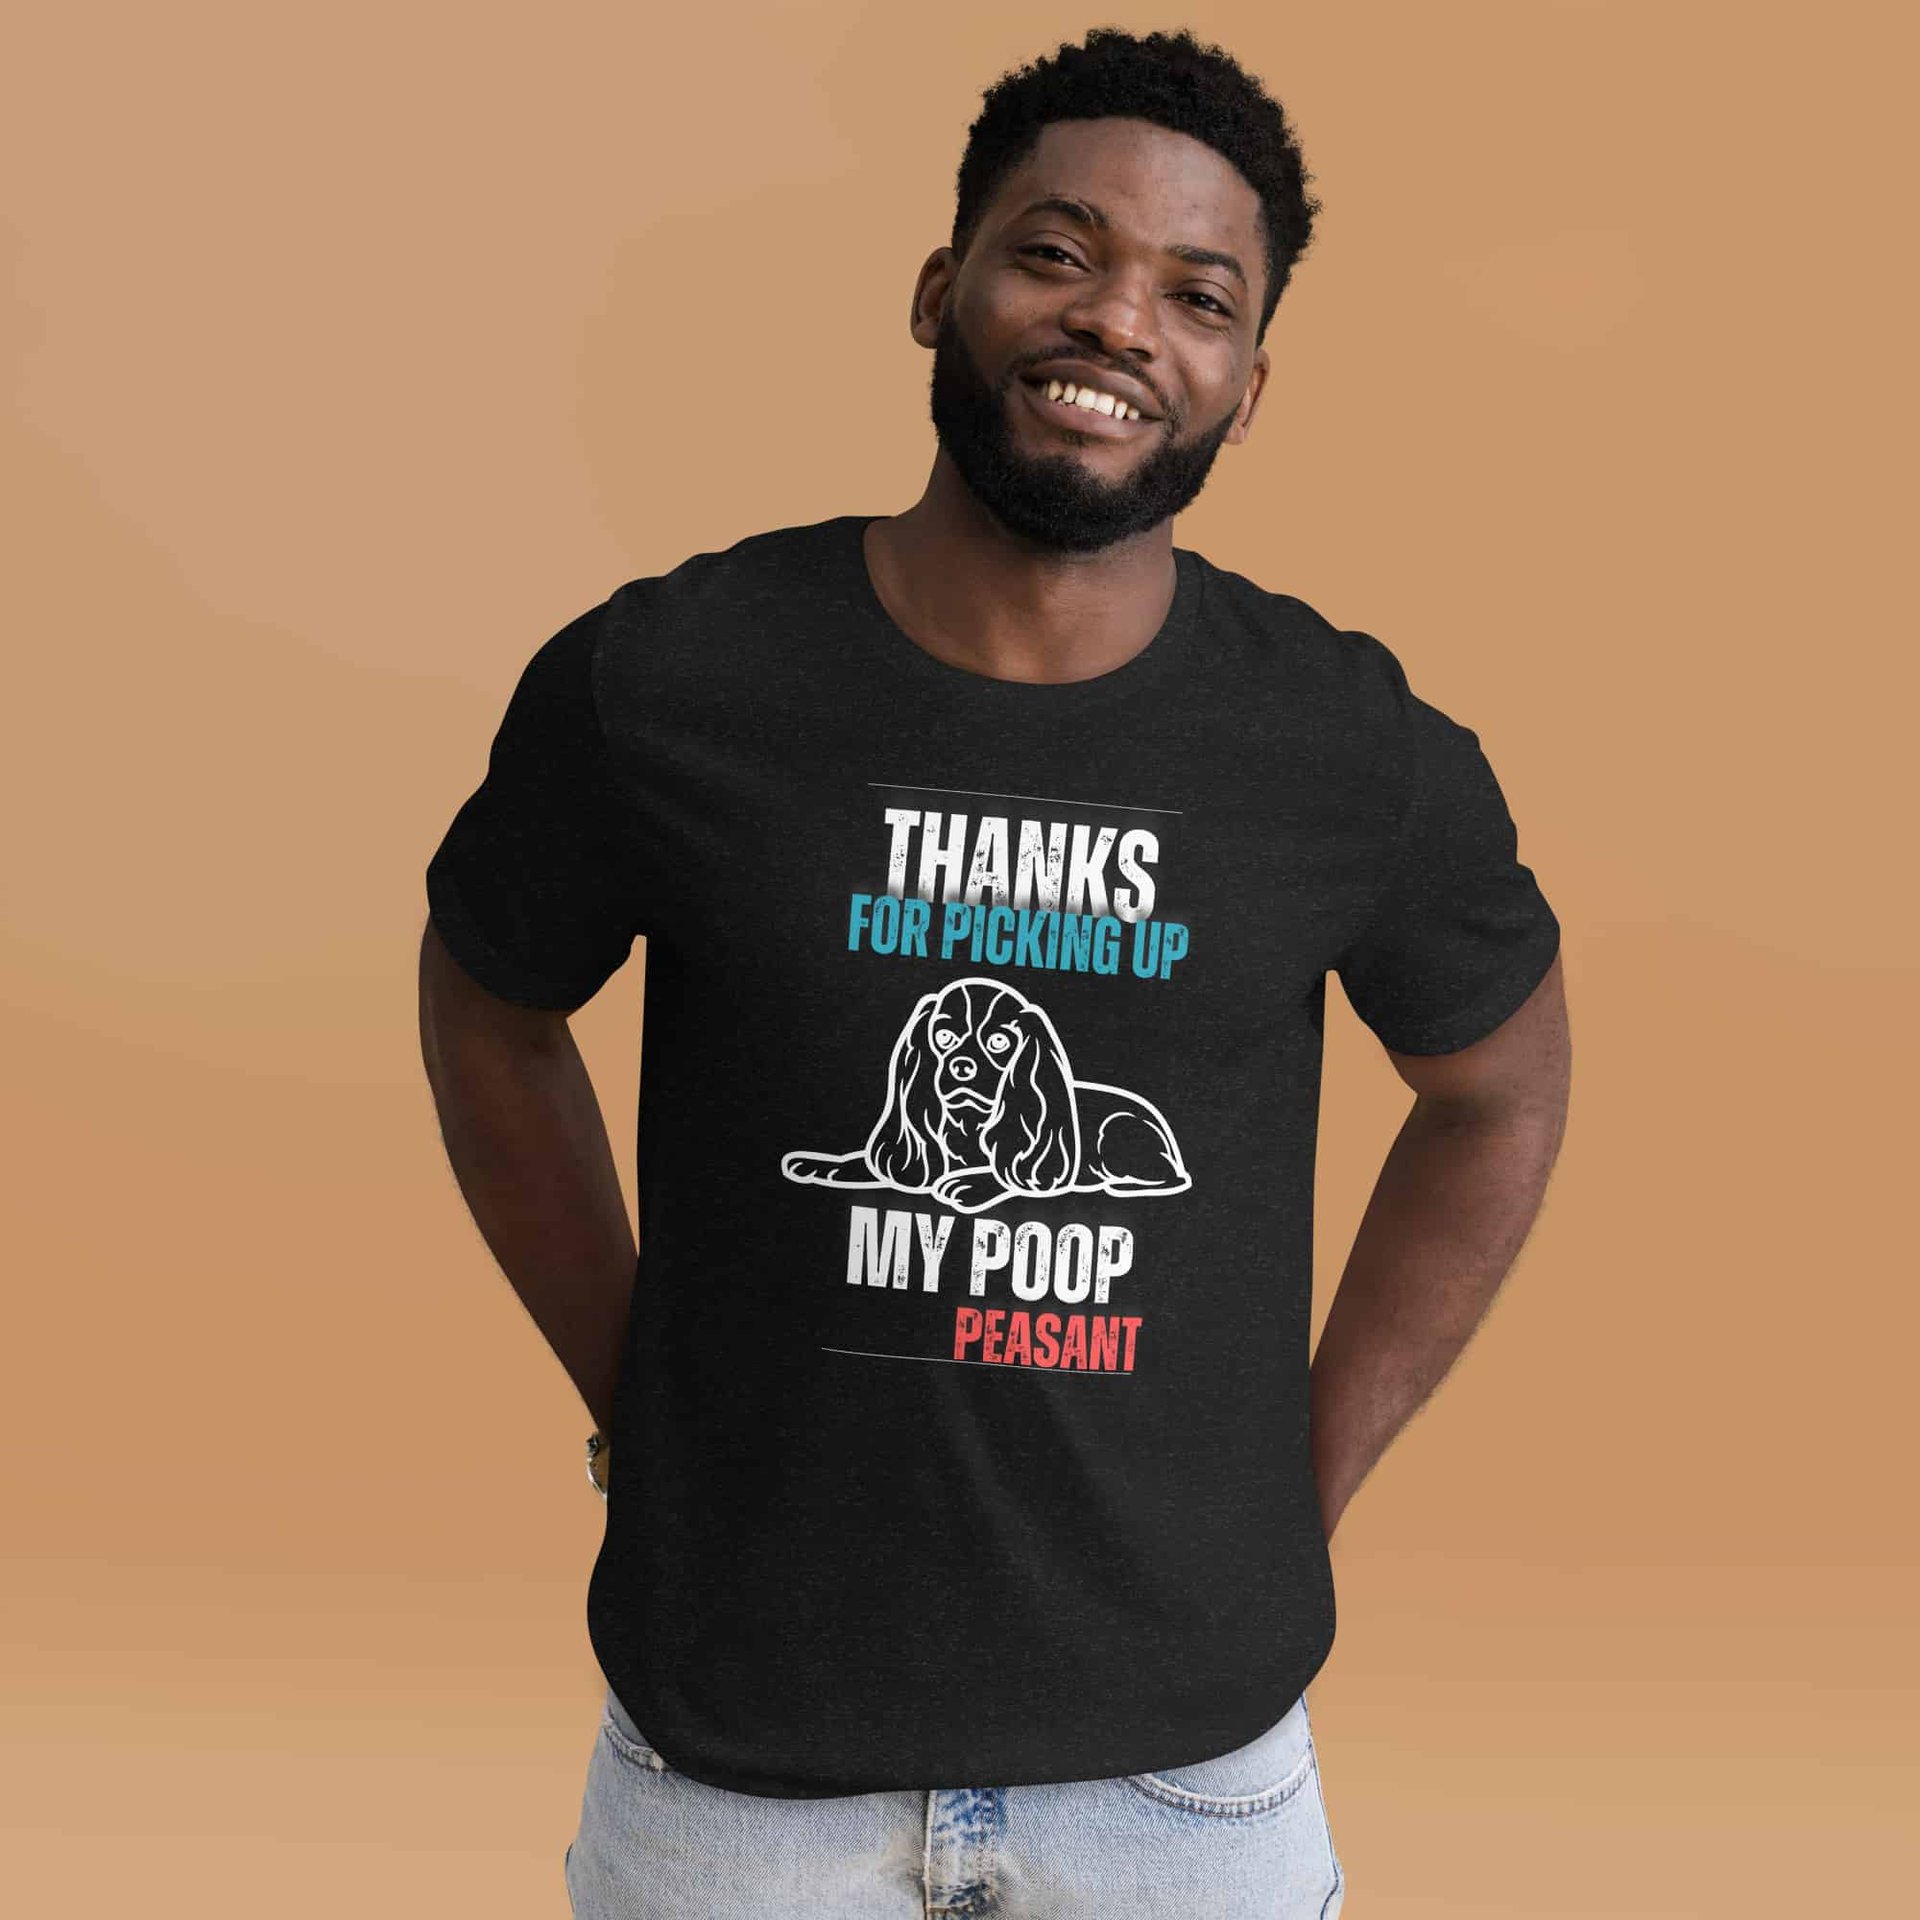 Thanks For Picking Up My POOP Funny Hounds Unisex T-Shirt. Black Heather. Male